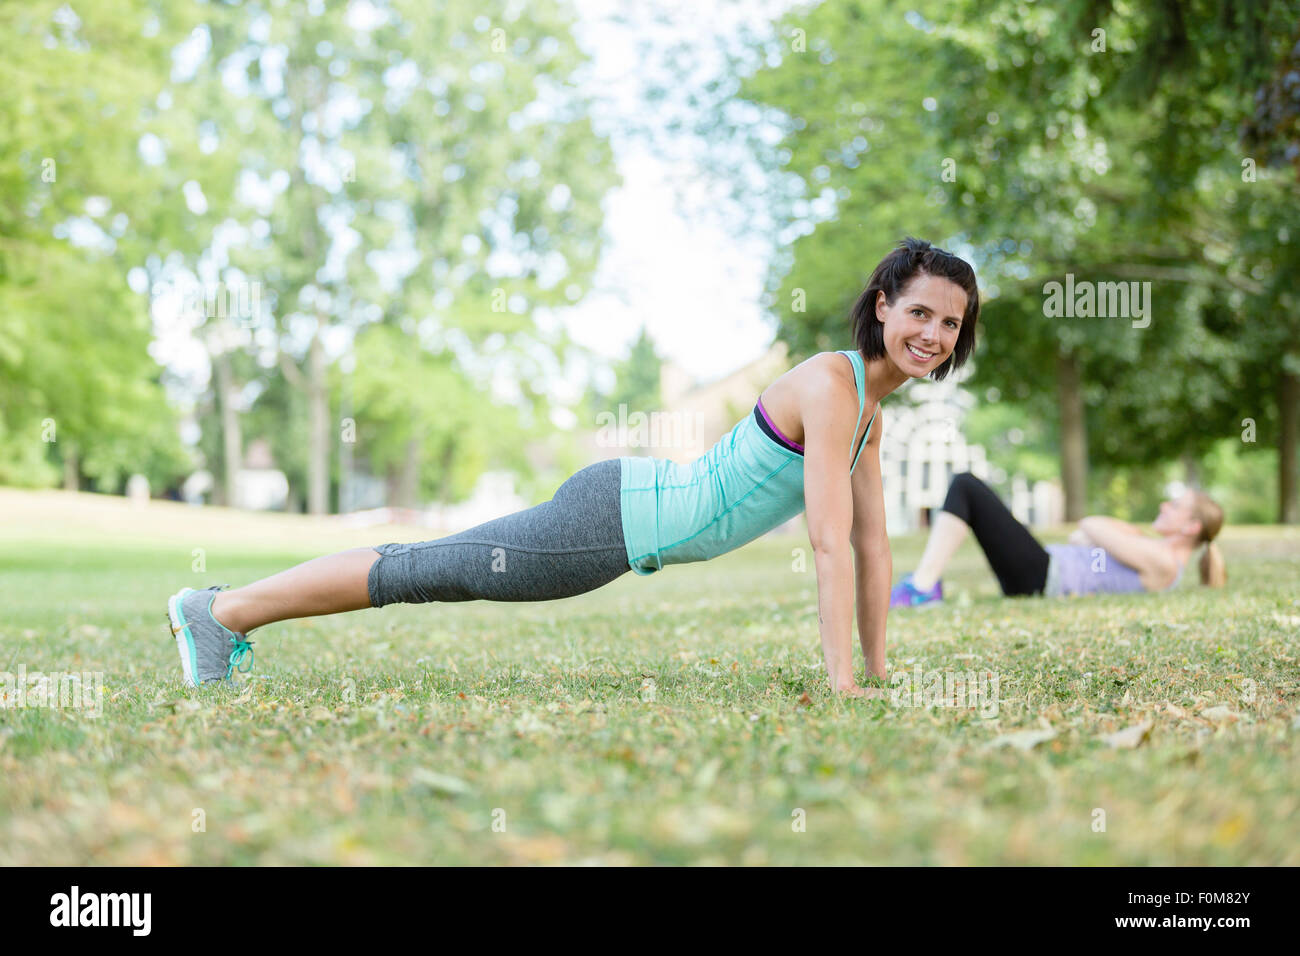 Two women during strength training Stock Photo